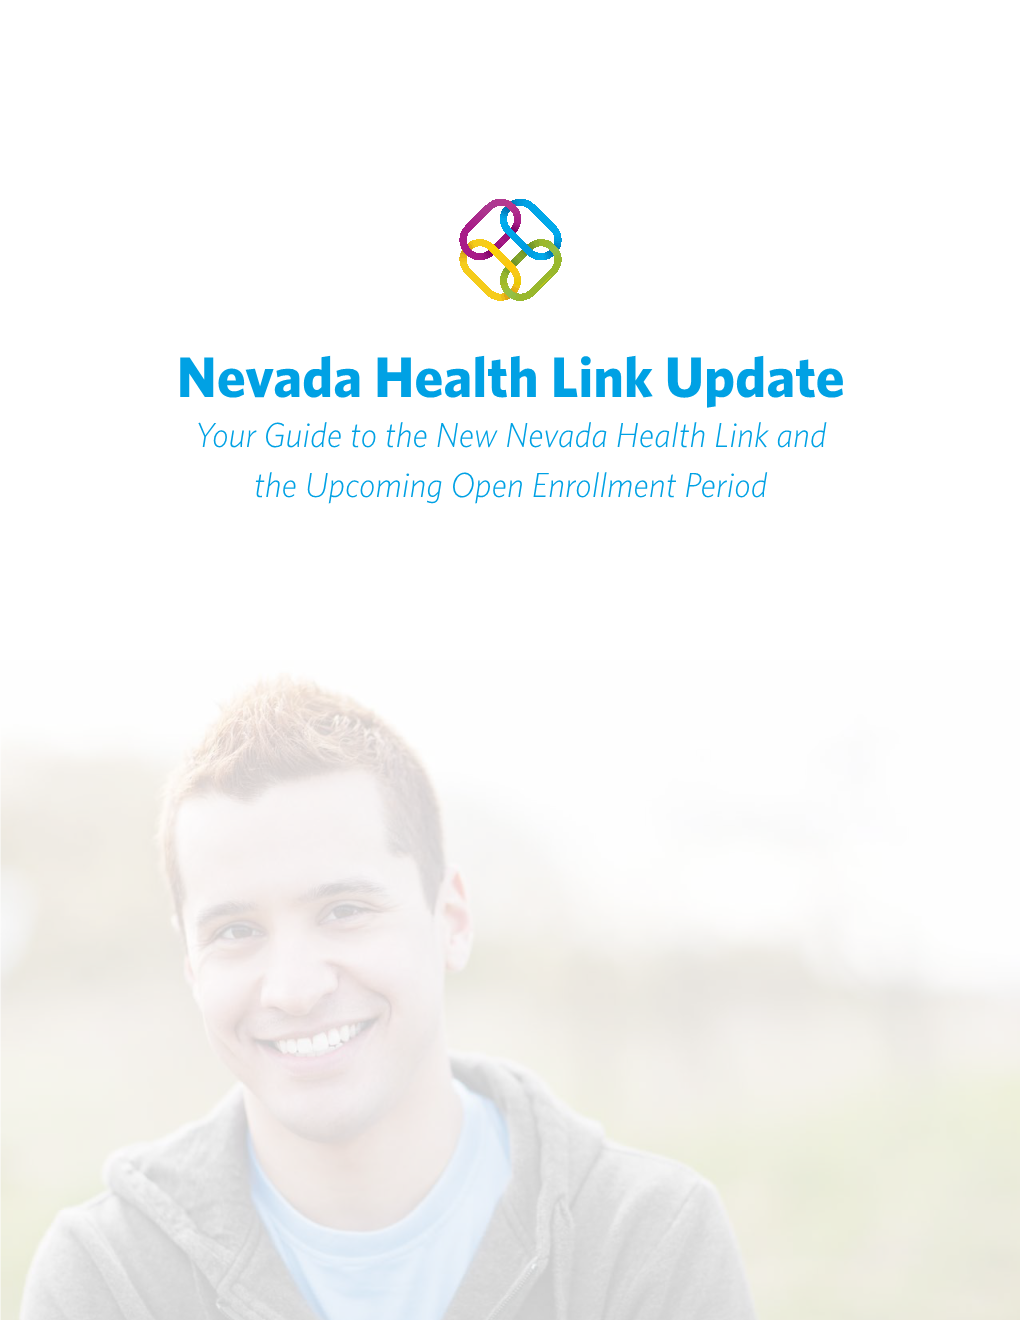 Nevada Health Link Update Your Guide to the New Nevada Health Link and the Upcoming Open Enrollment Period